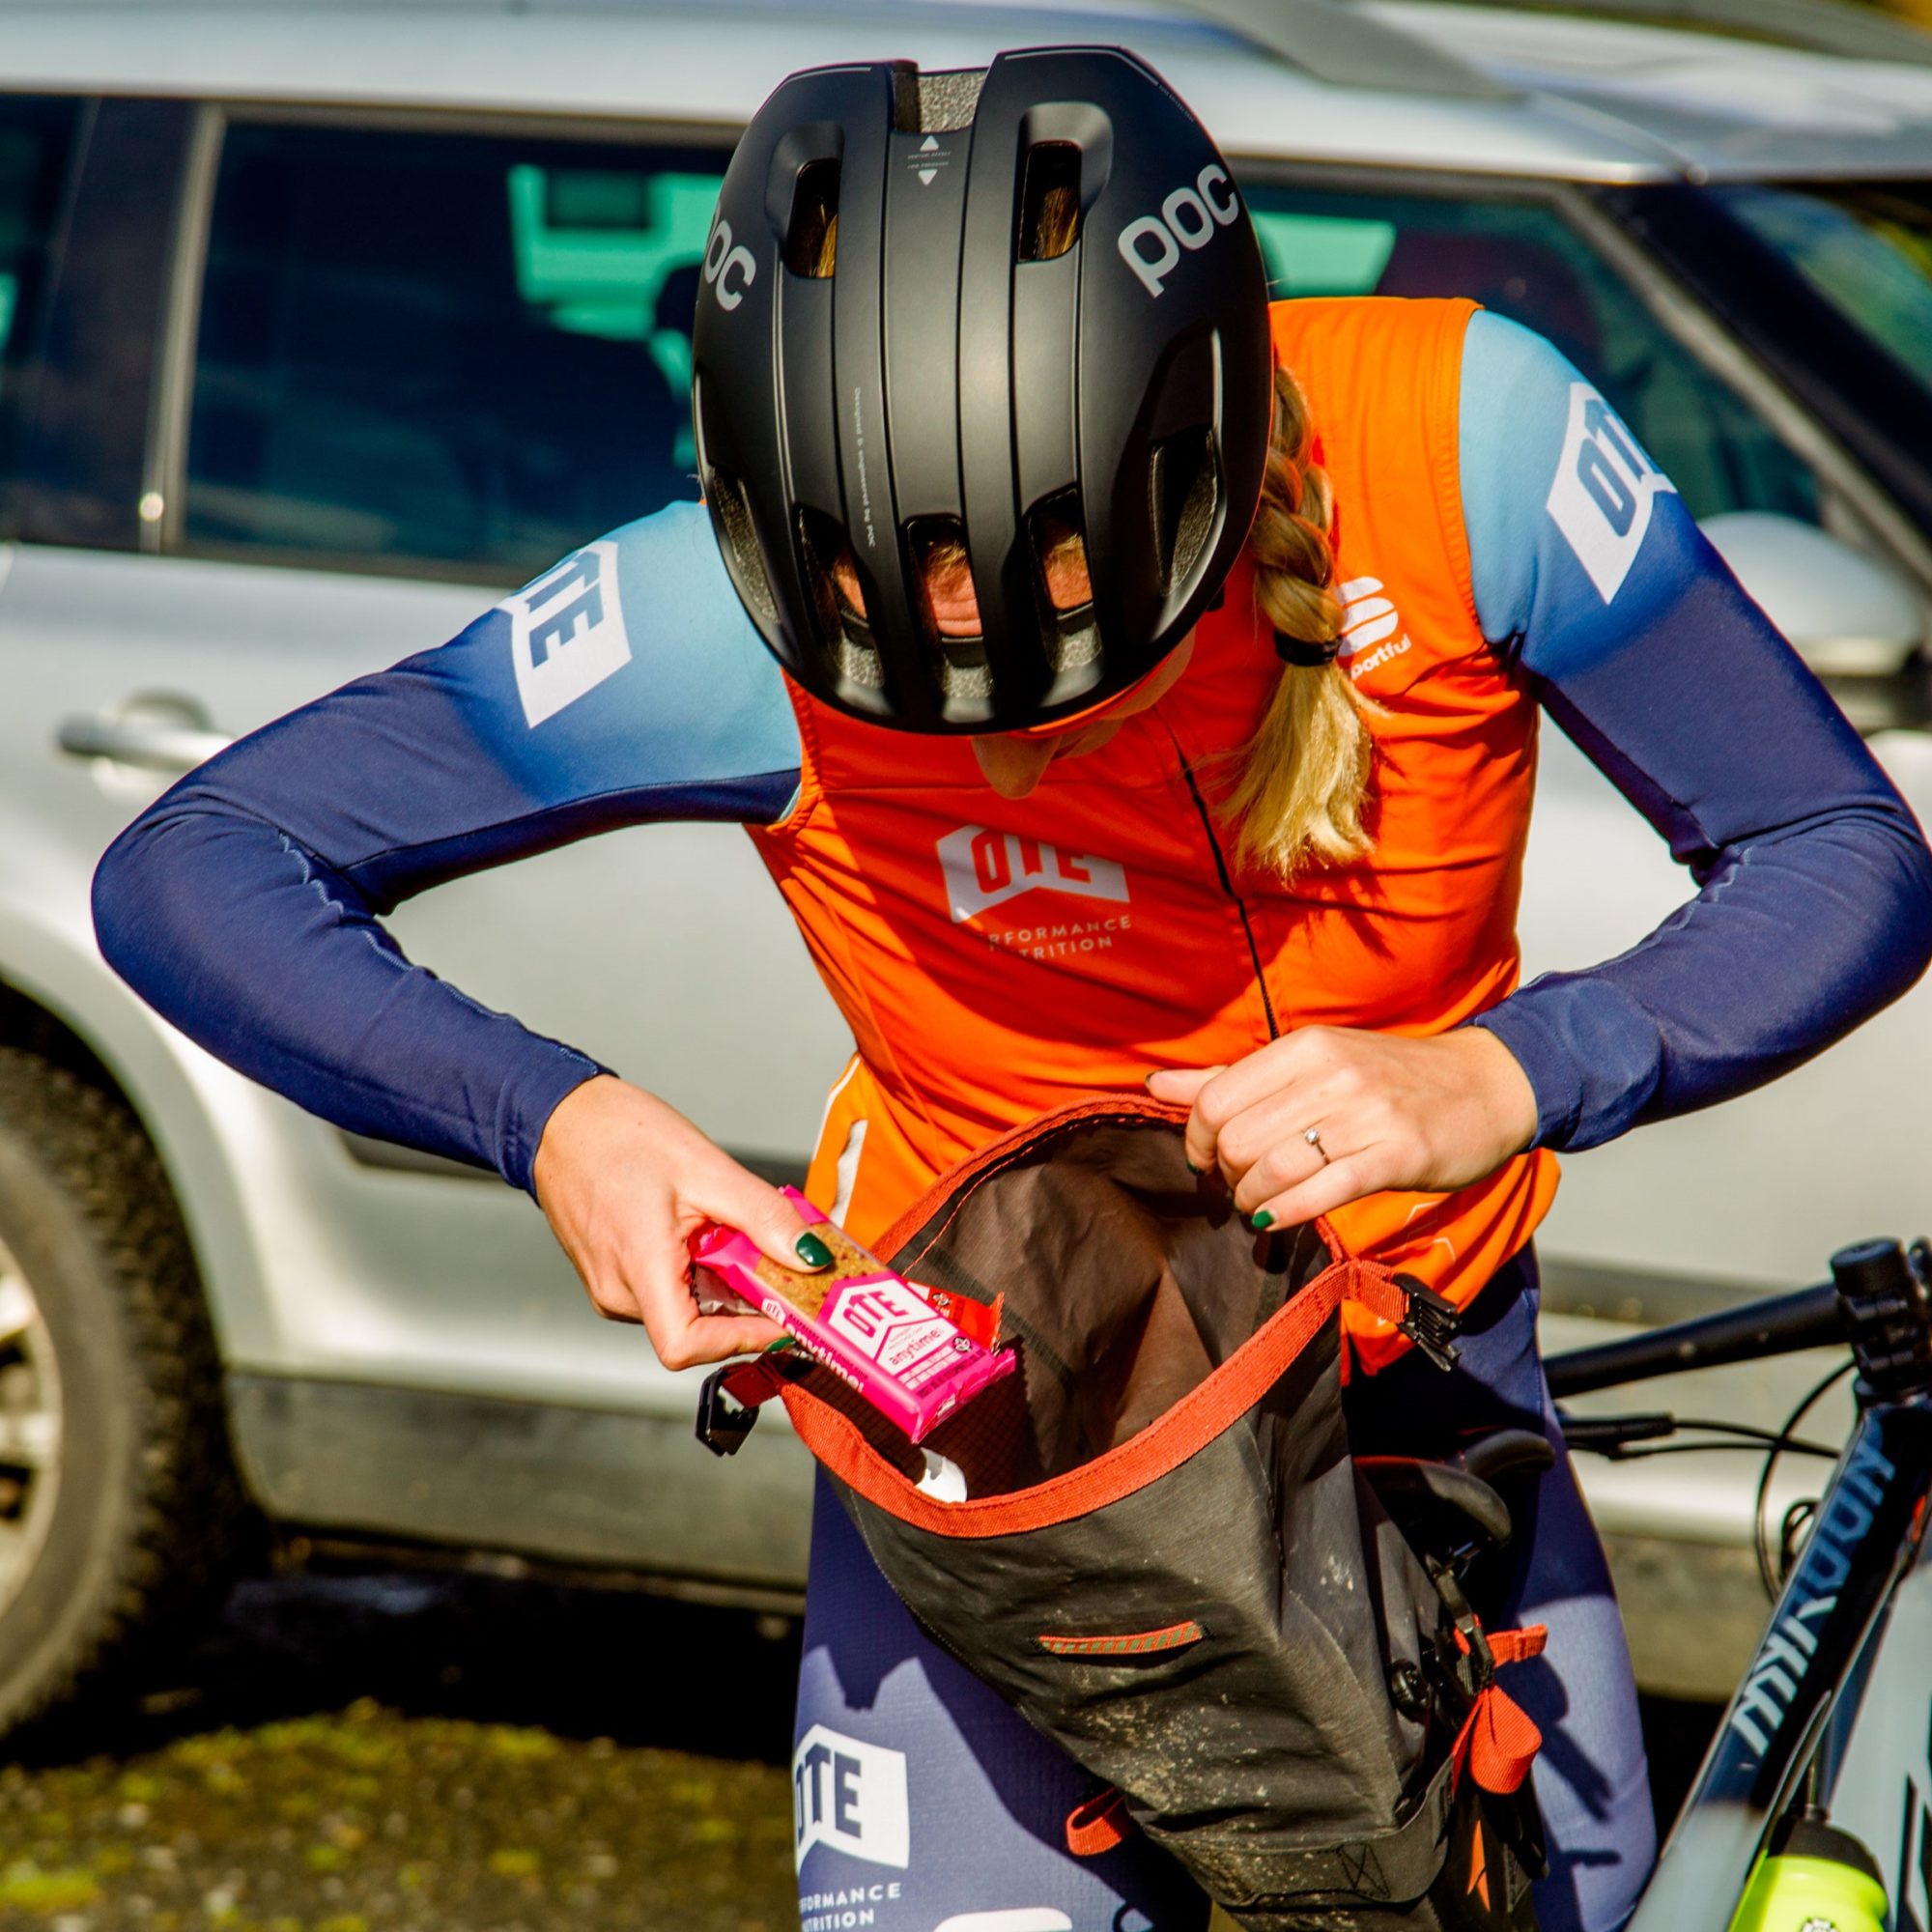 How To Fuel The Dirty Reiver? — OTE Sports